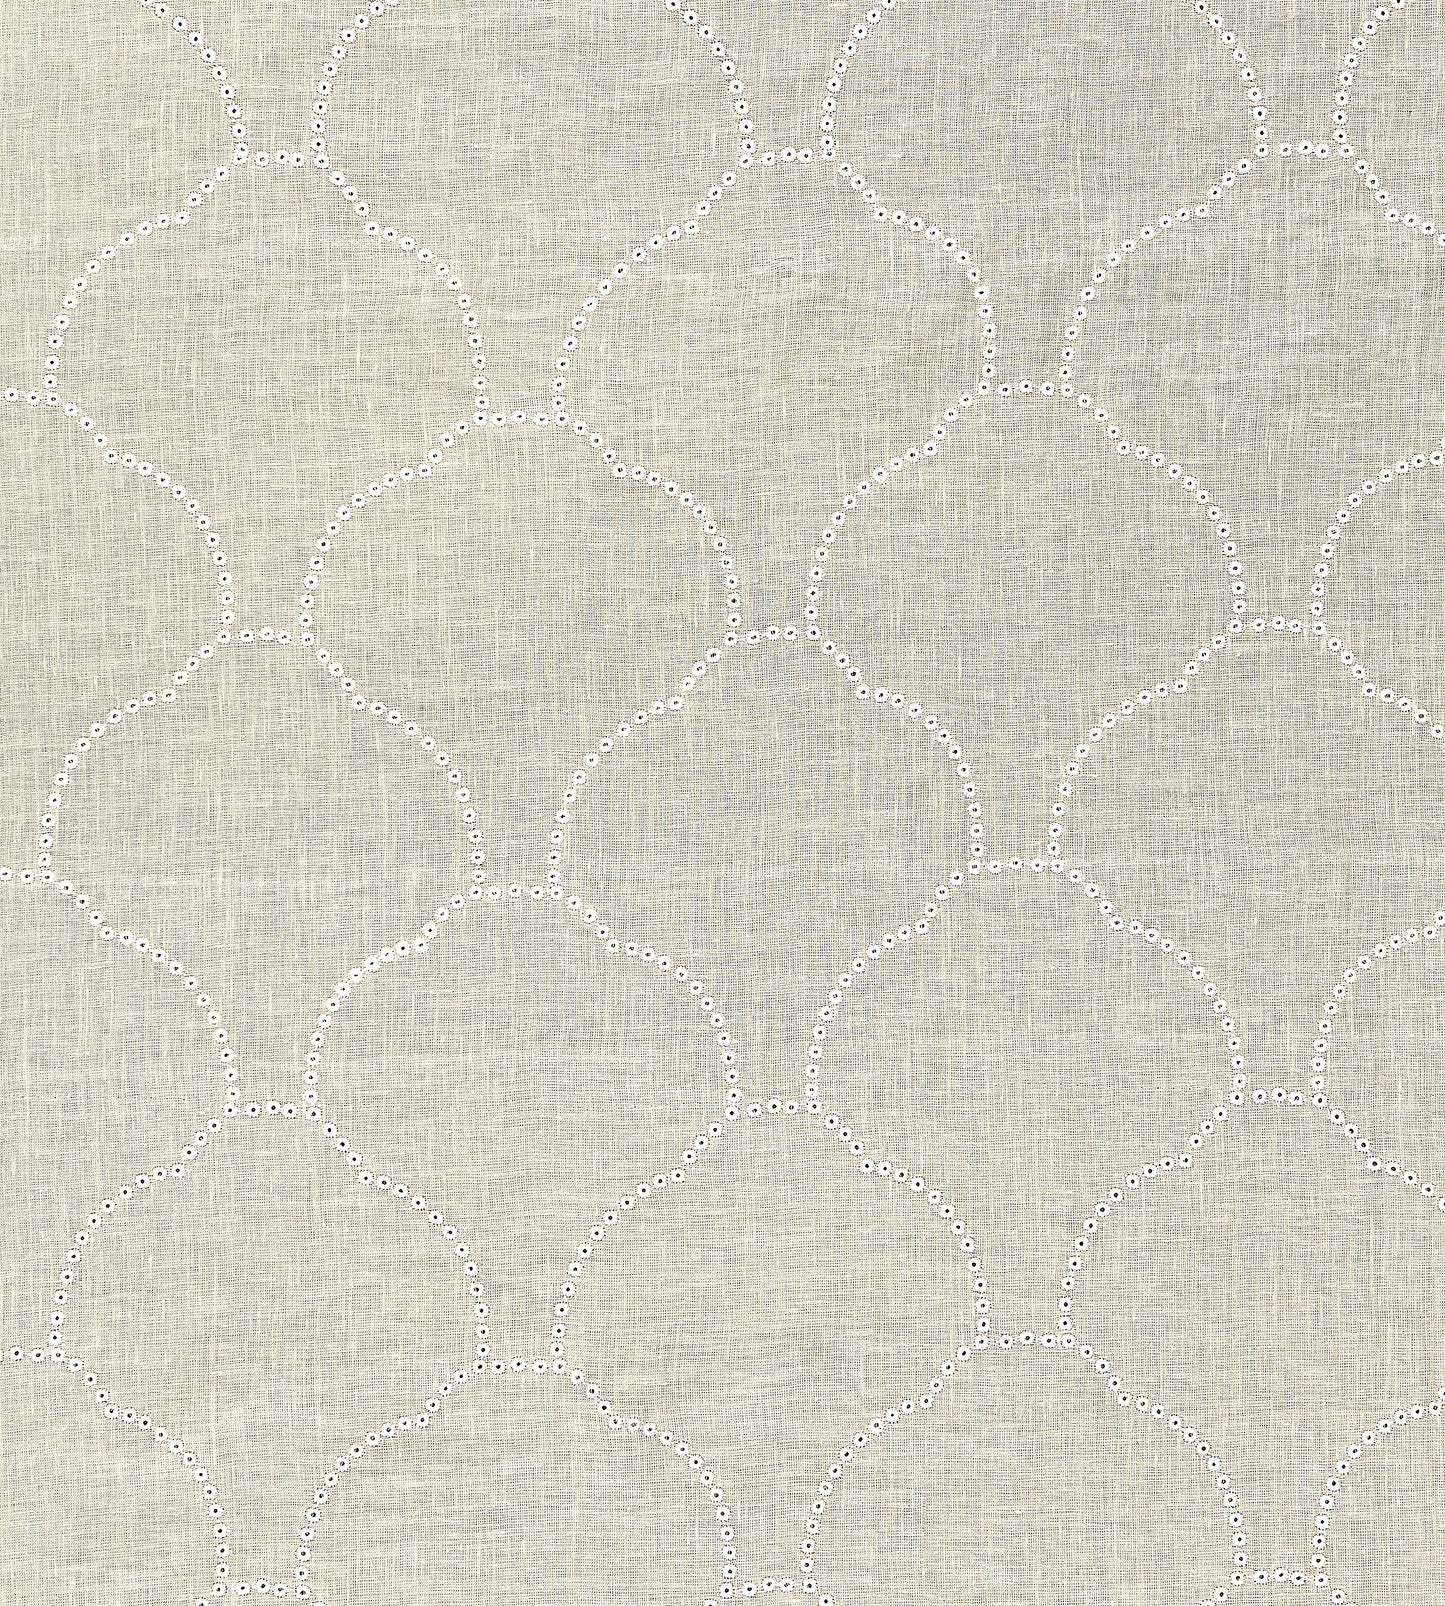 Purchase Scalamandre Fabric Item# SC 000227038, Coquille Sheer Flax 1